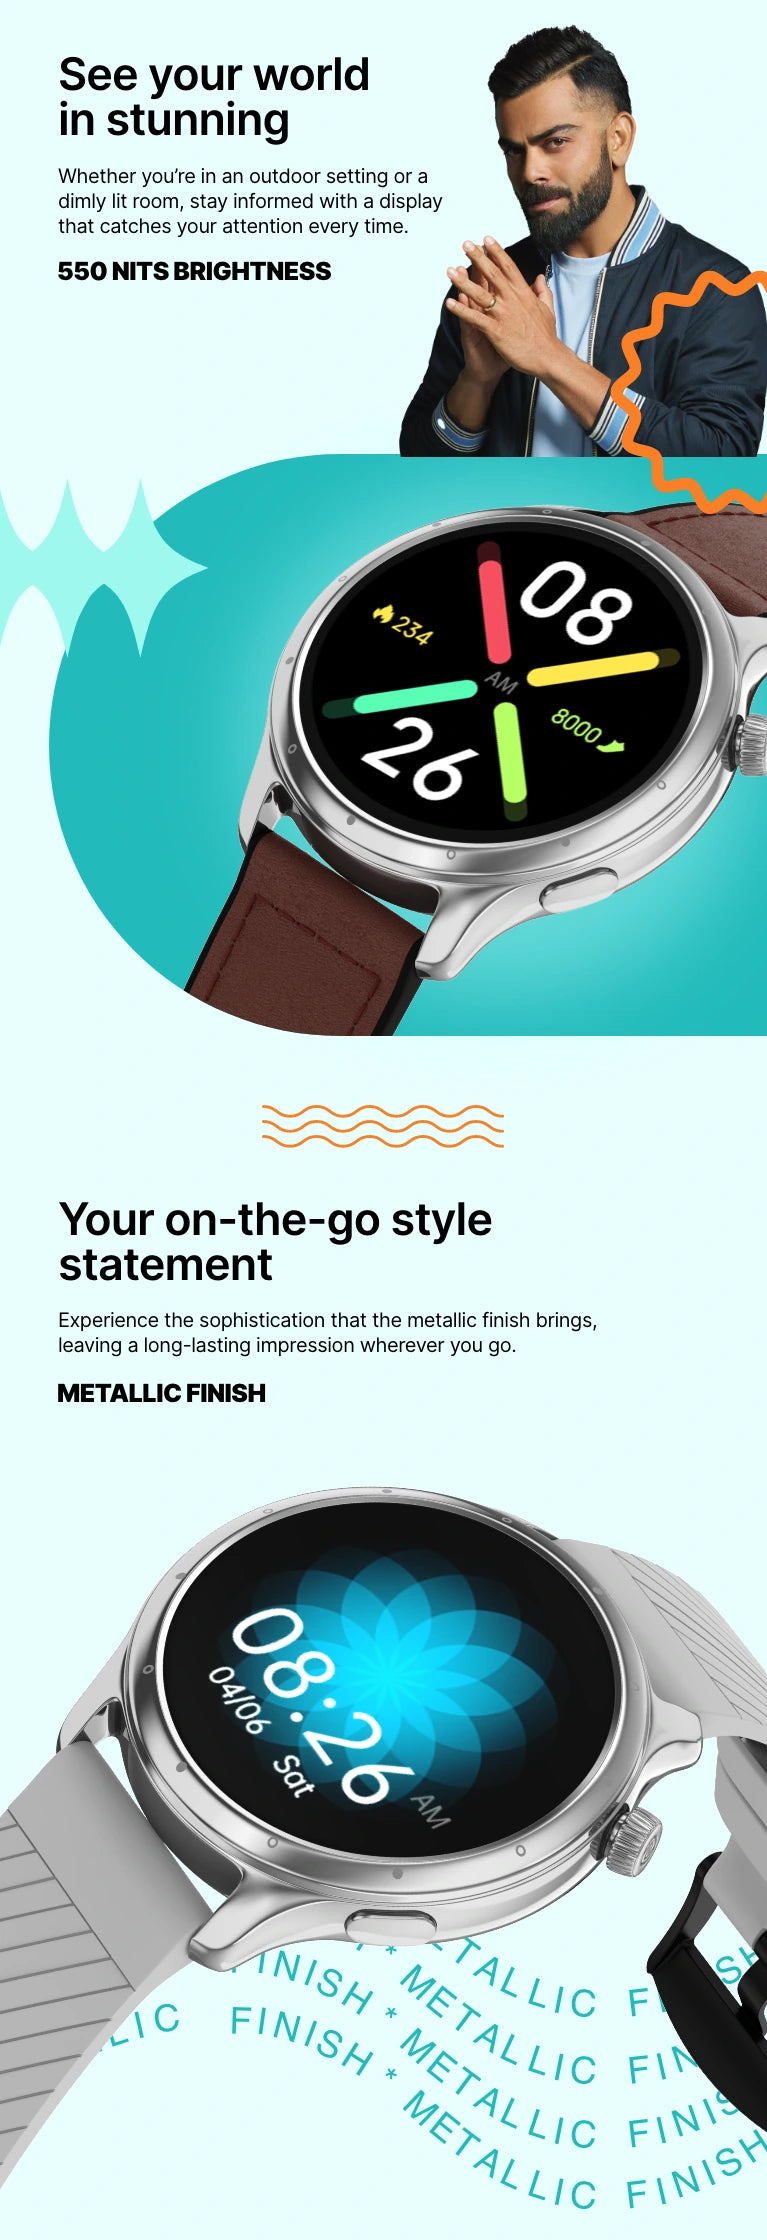 7 Things Your Smart Watch Can Do - Gonoise Watch - Quora